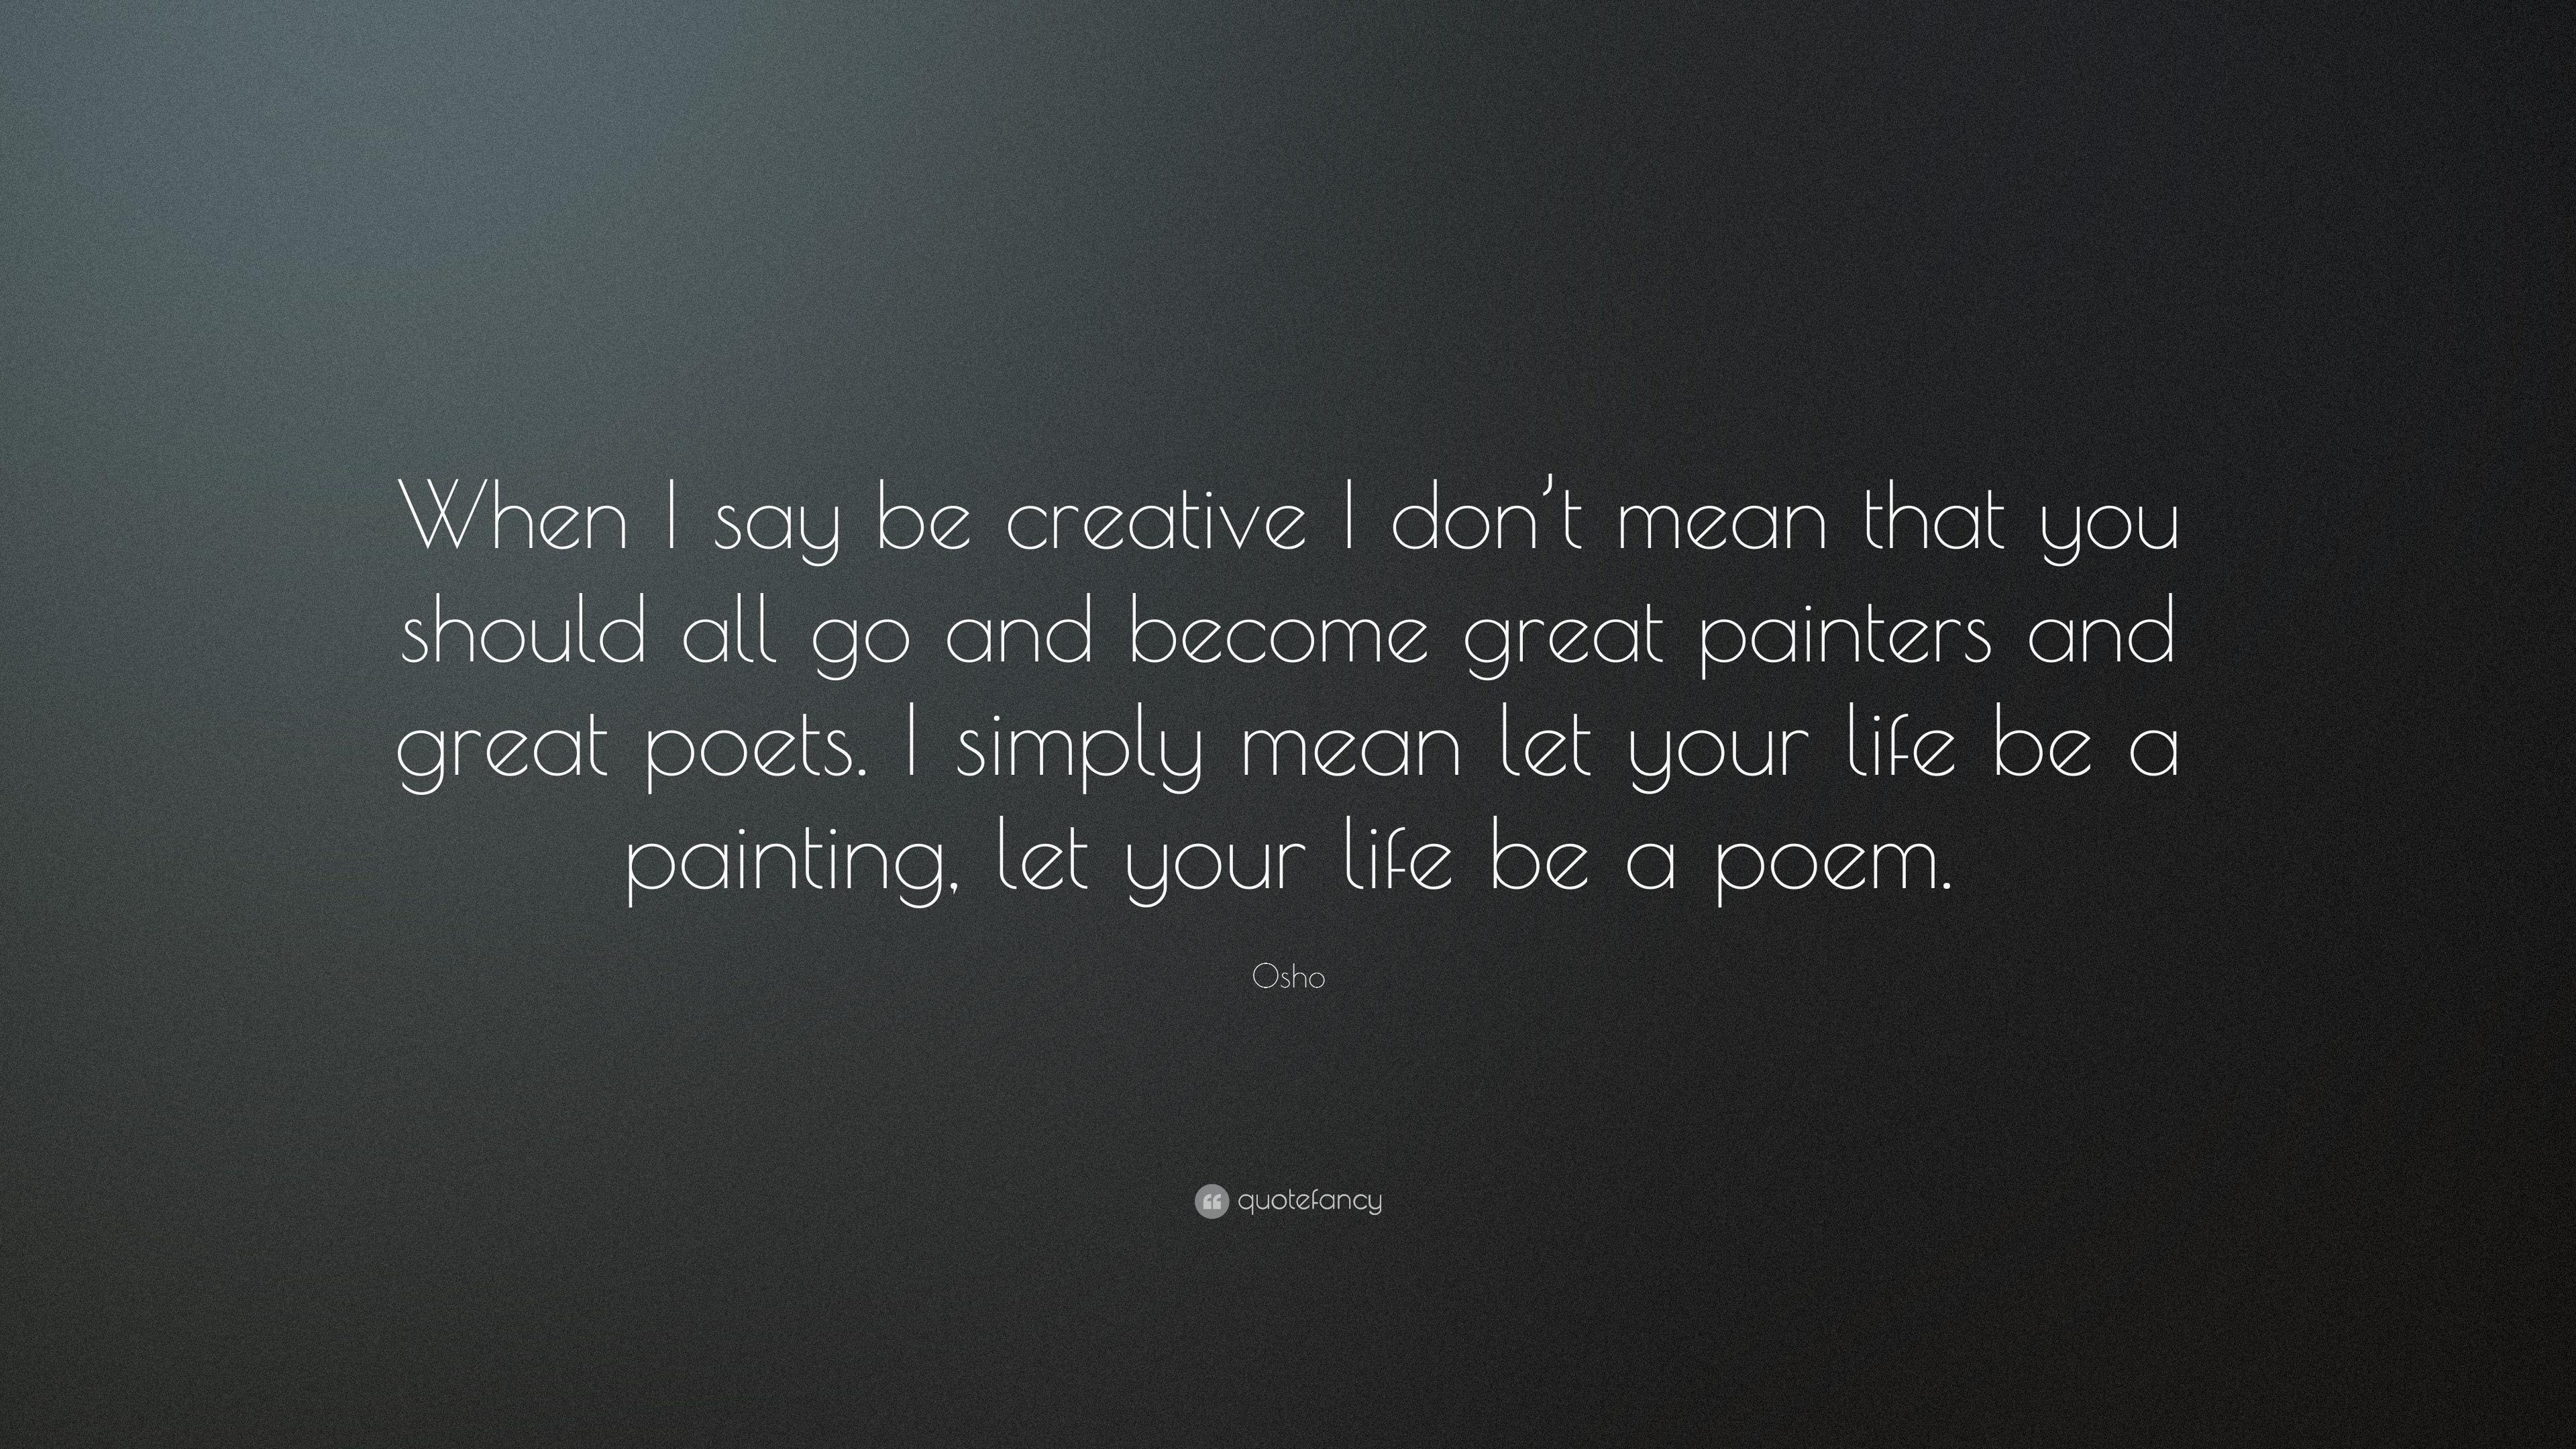 Osho Quote: “When I say be creative I don't mean that you should all